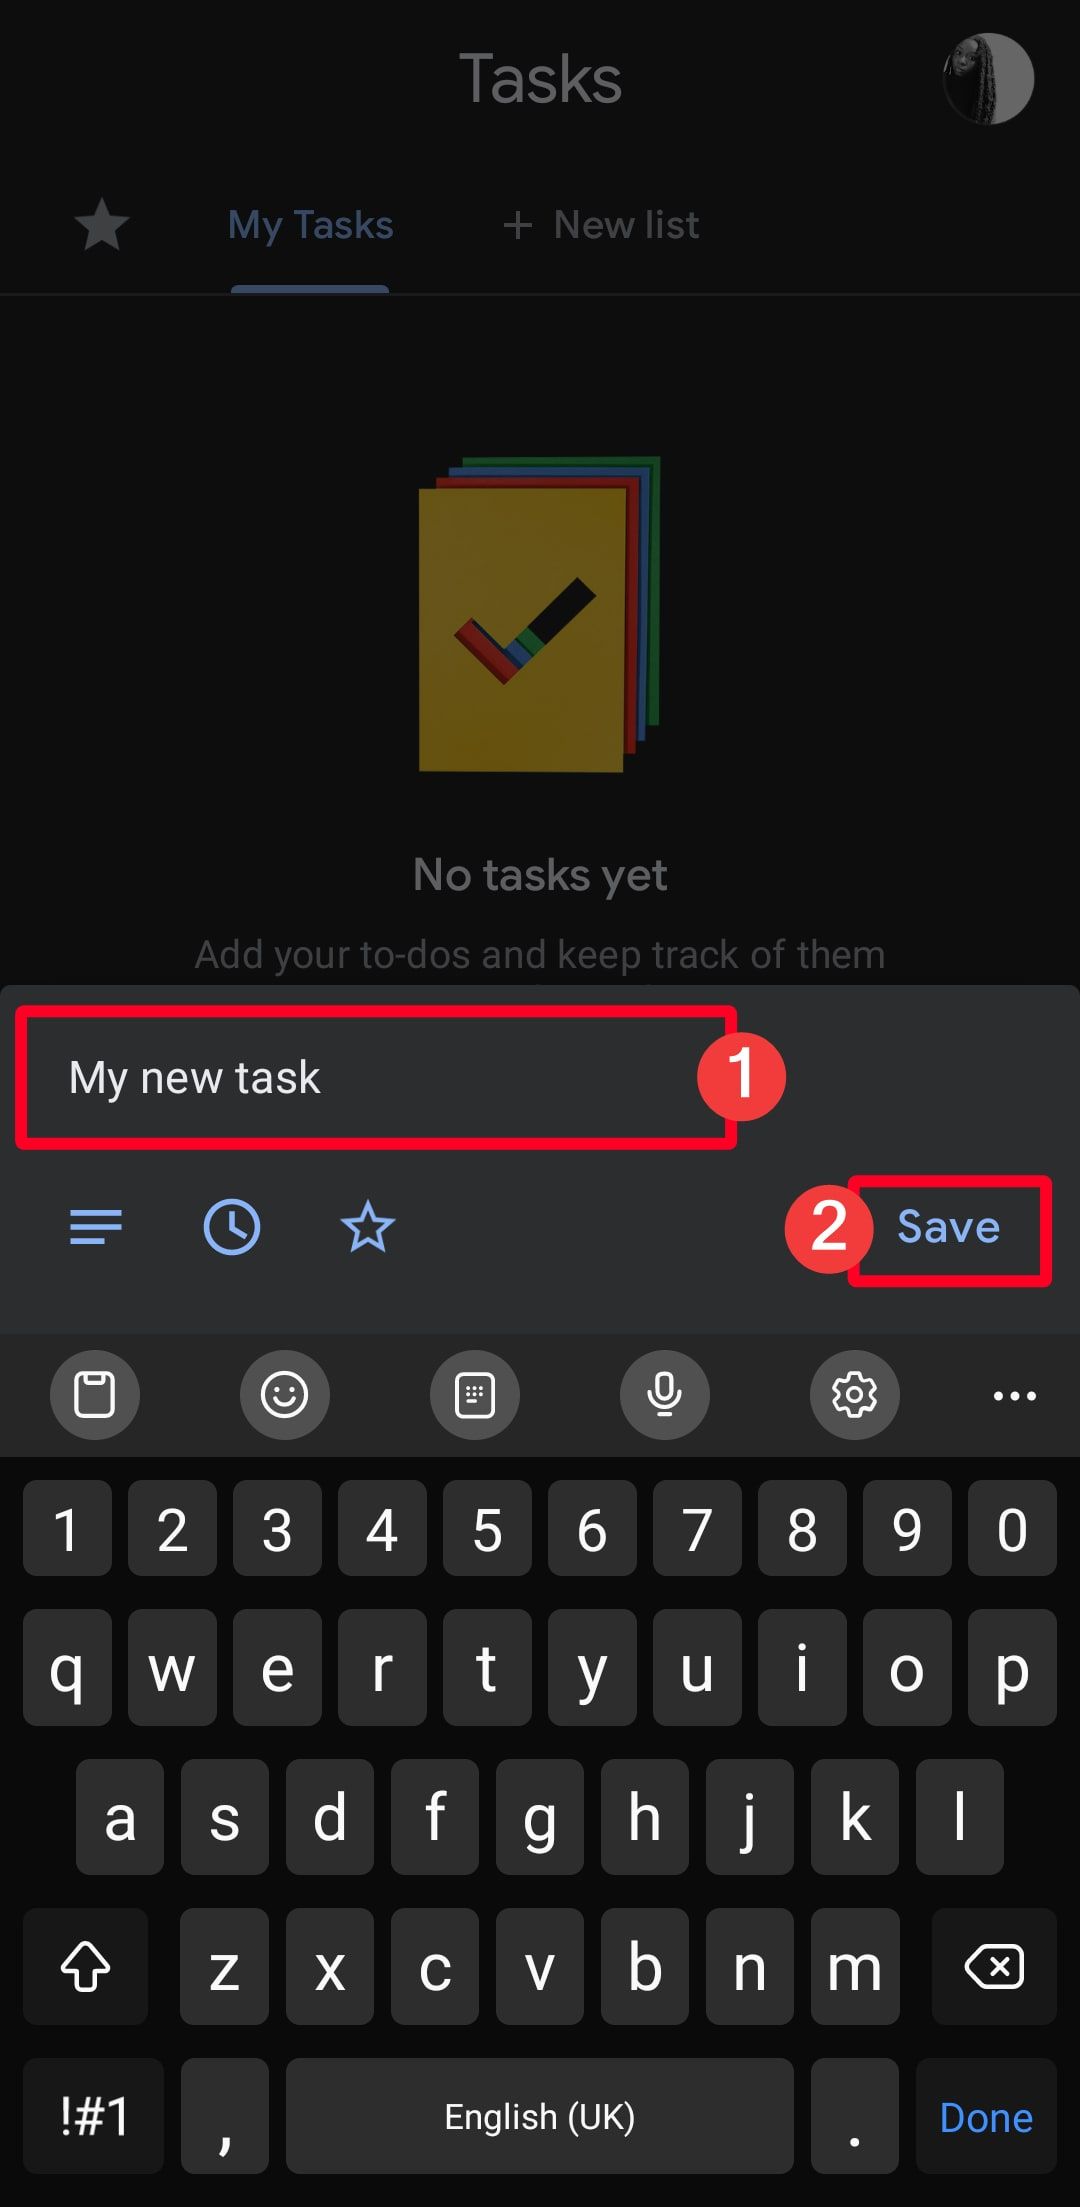 Creating a new task in Google Tasks Android app